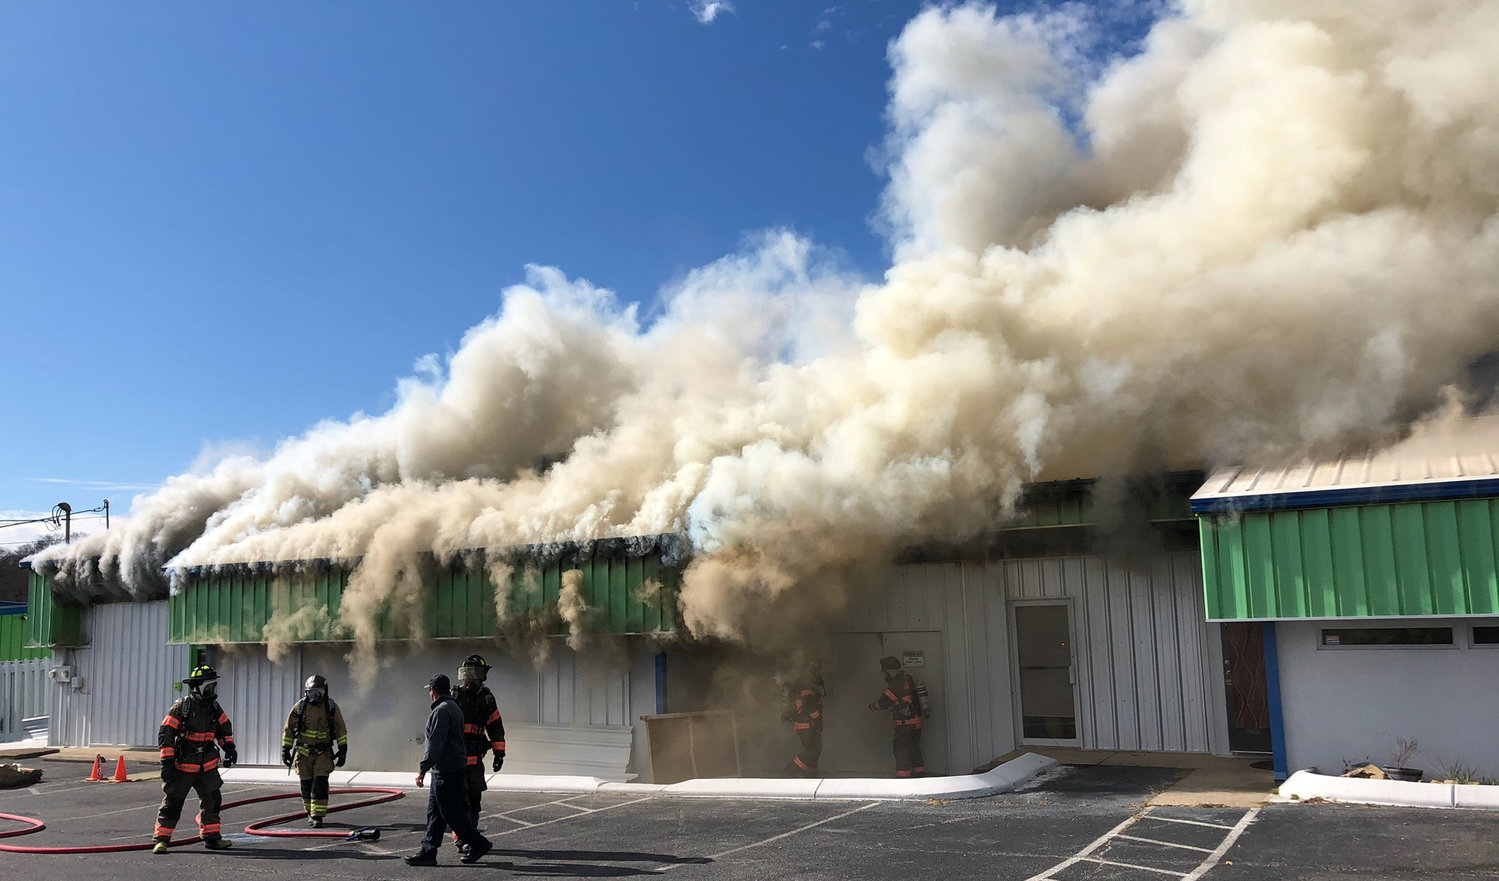 Shelbyville firefighters battle a blaze at midday Monday at Shelbyville Self Storage, Bethany Lane. At one point the building was almost completely obscured by smoke.